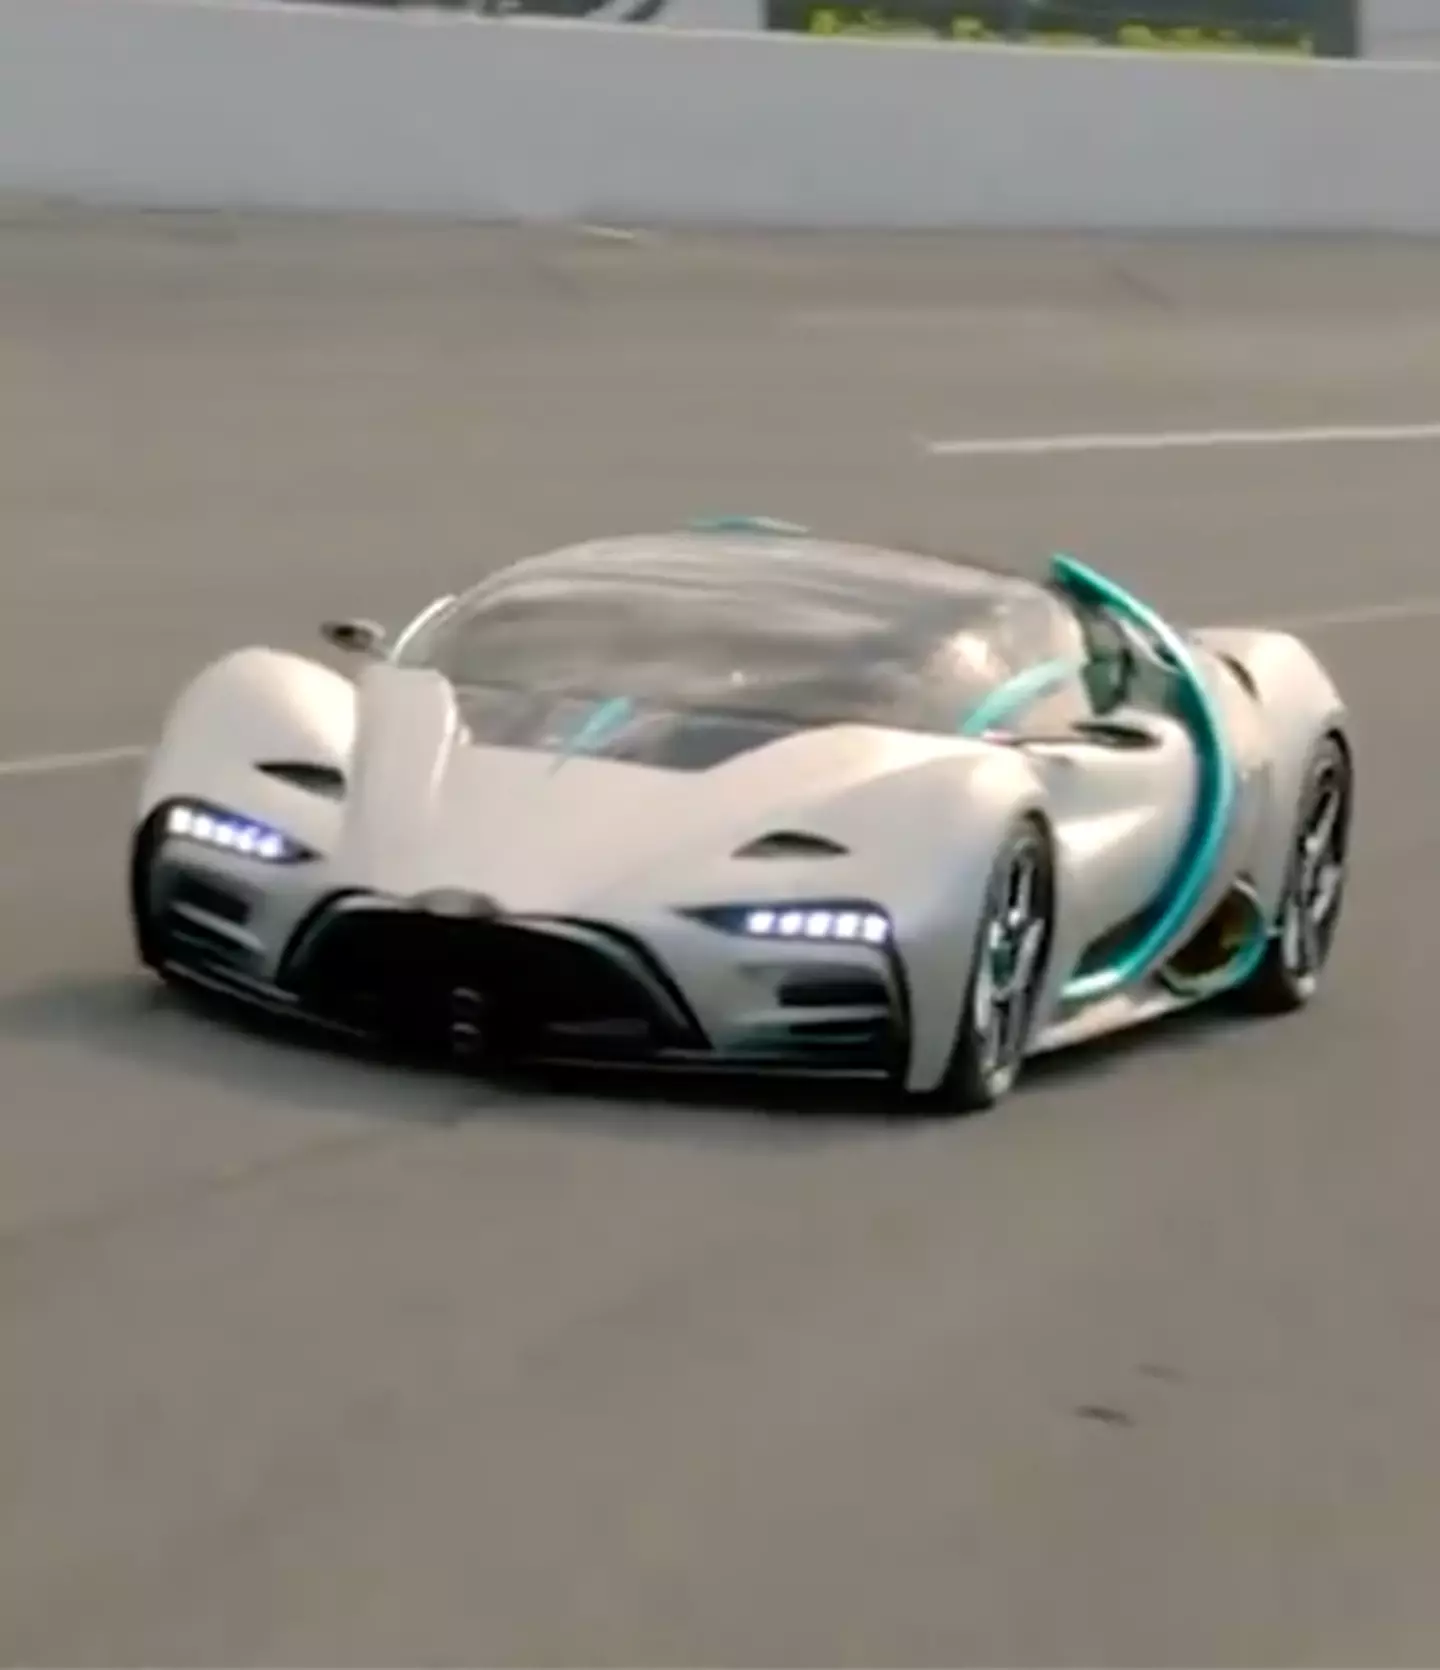 The hydrogen prototype produces drinkable water through its exhaust / MrBeast/ X